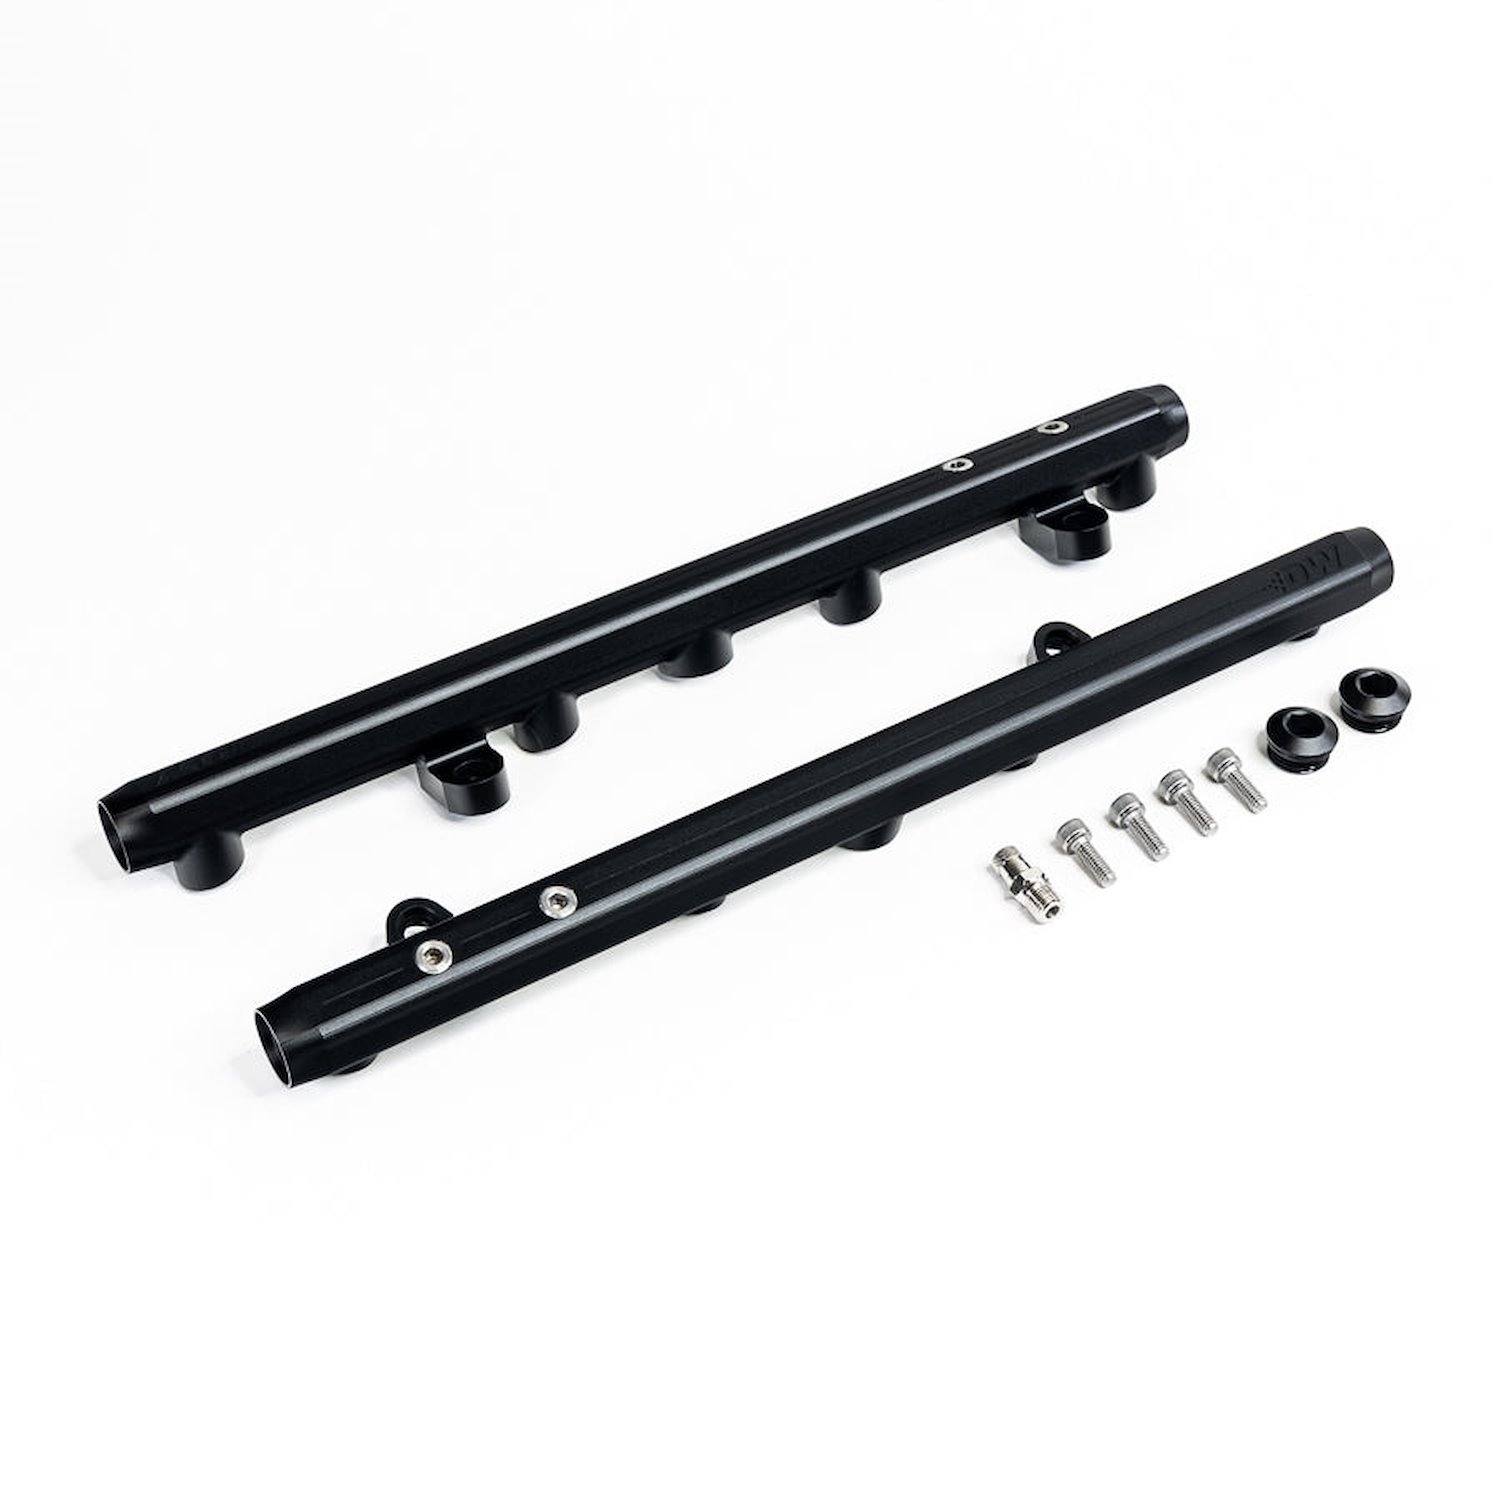 7202 Chevrolet LS2 and LS3 Fuel Rail for 2005-6 GTO 2006-7 Cadillac CTS-V 2008-13 Corvette 2010-15 Camaro SS 2014-17 Chevy SS